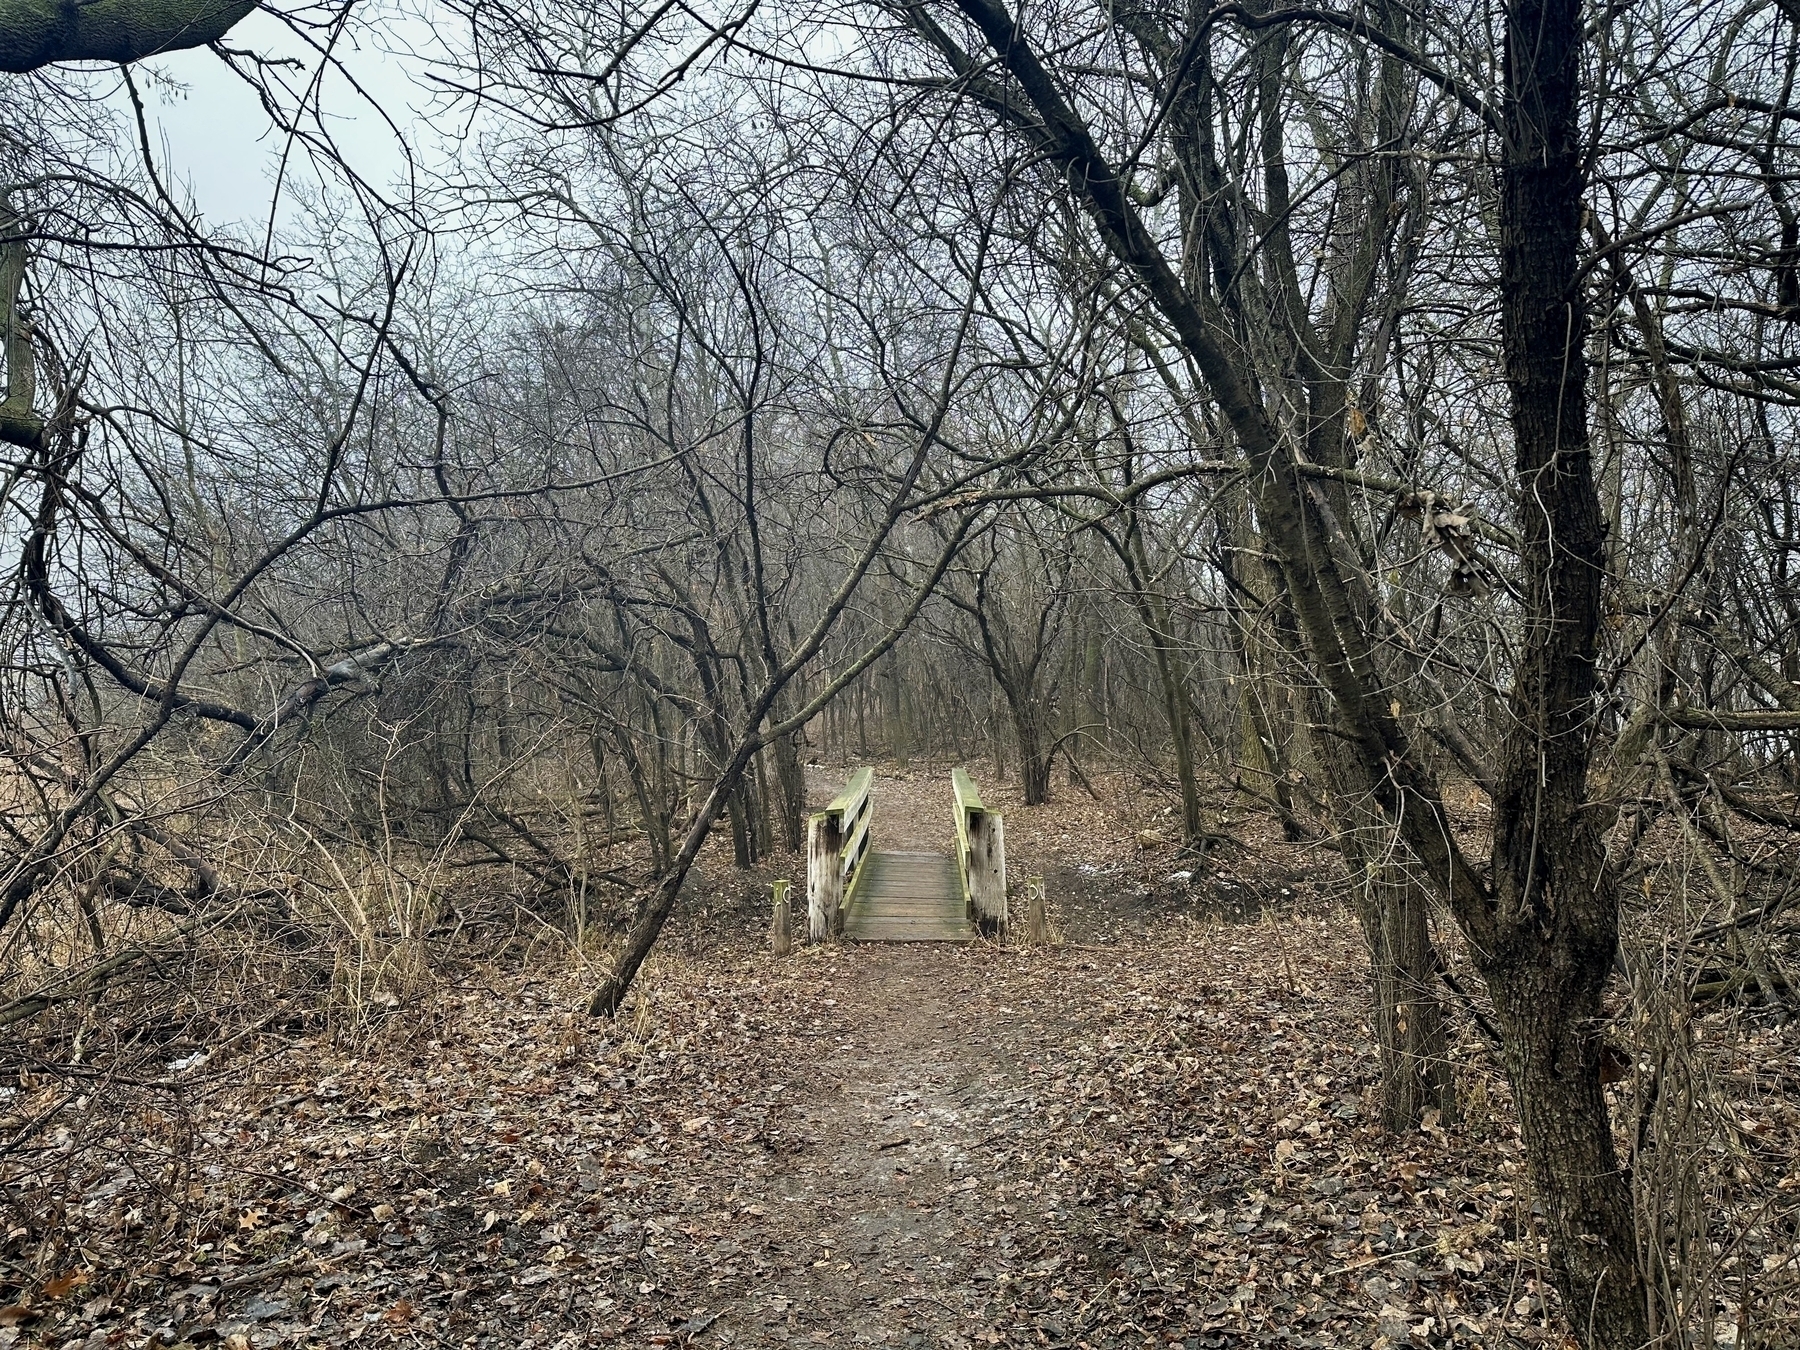 A serene, yet eerie pathway in a barren forest leading to a small, old wooden bridge amidst leafless trees. The sky is overcast, casting a grey hue over the entire scene.